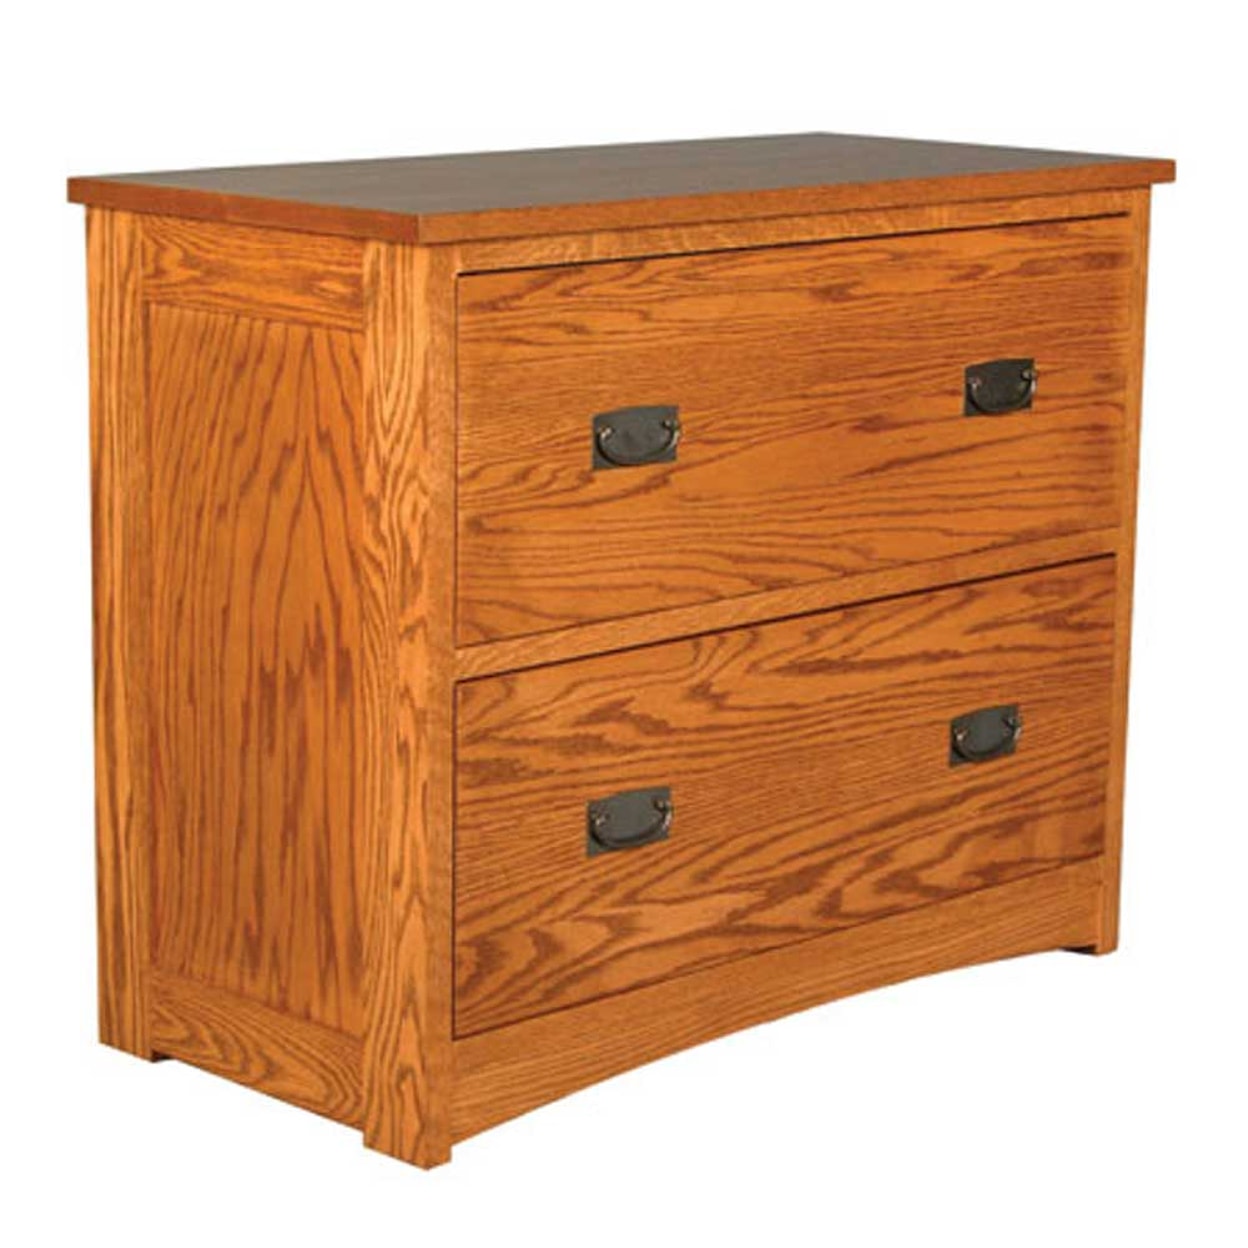 Simply Amish Prairie Mission Lateral File Cabinet